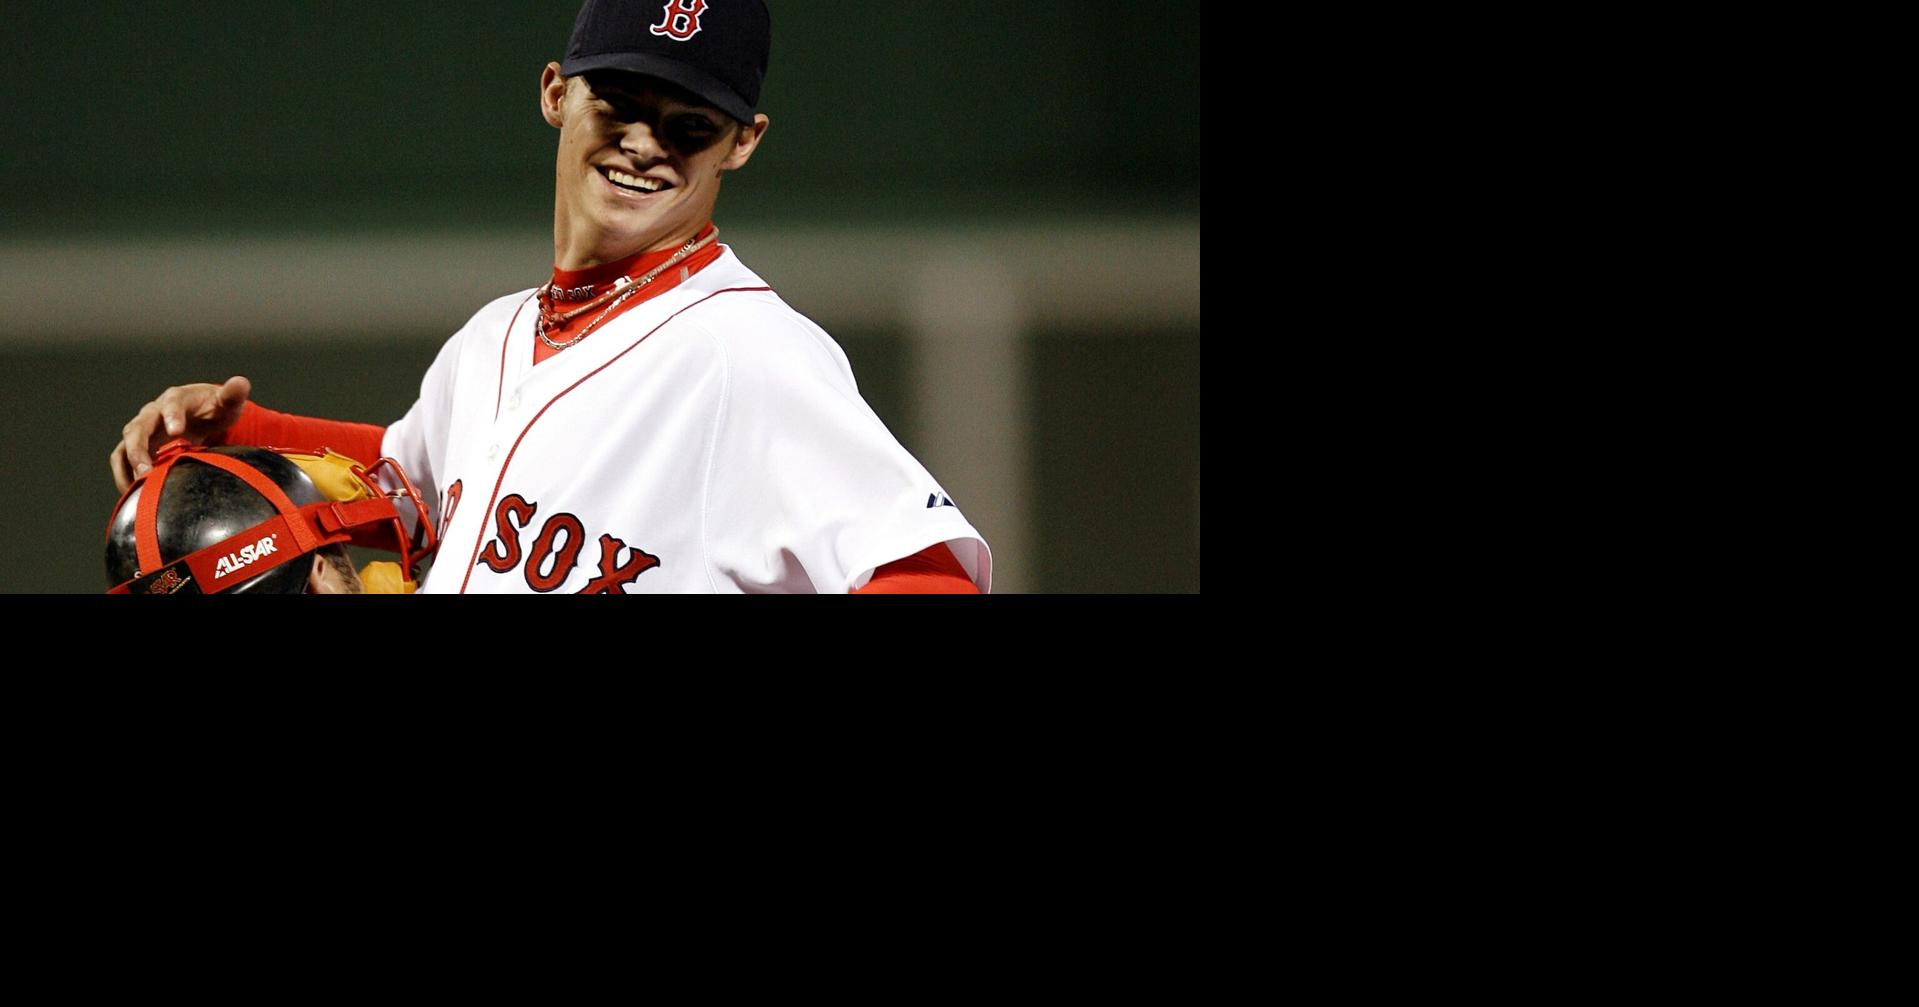 Clay Buchholz goes to 7-0 as Red Sox beat White Sox